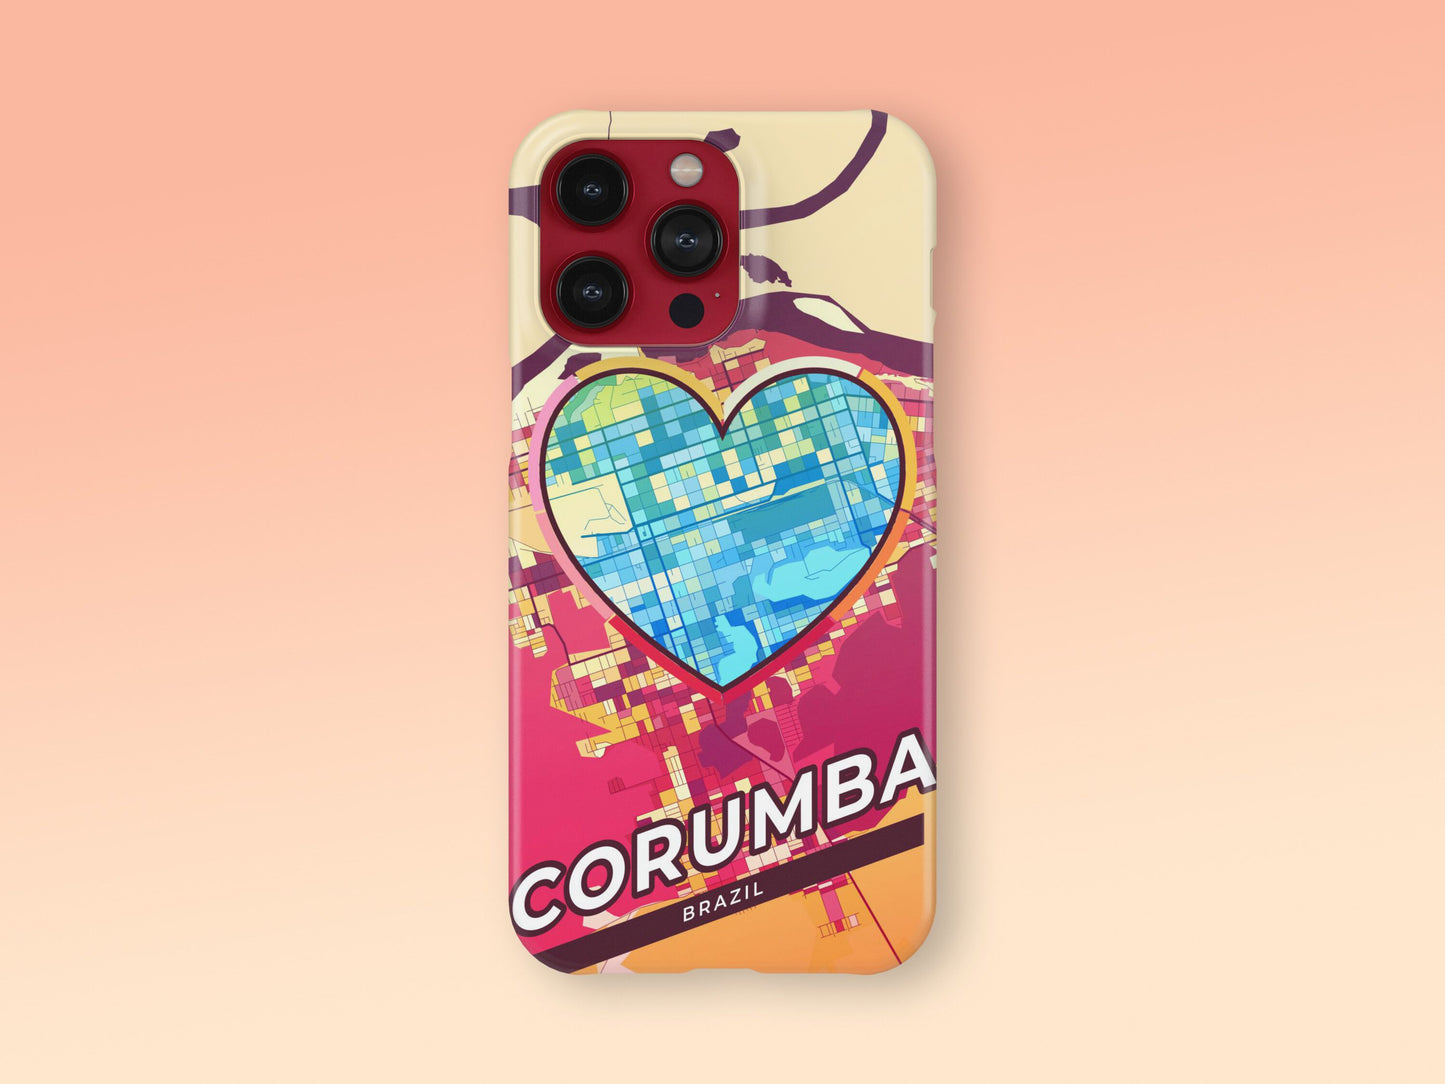 Corumba Brazil slim phone case with colorful icon. Birthday, wedding or housewarming gift. Couple match cases. 2